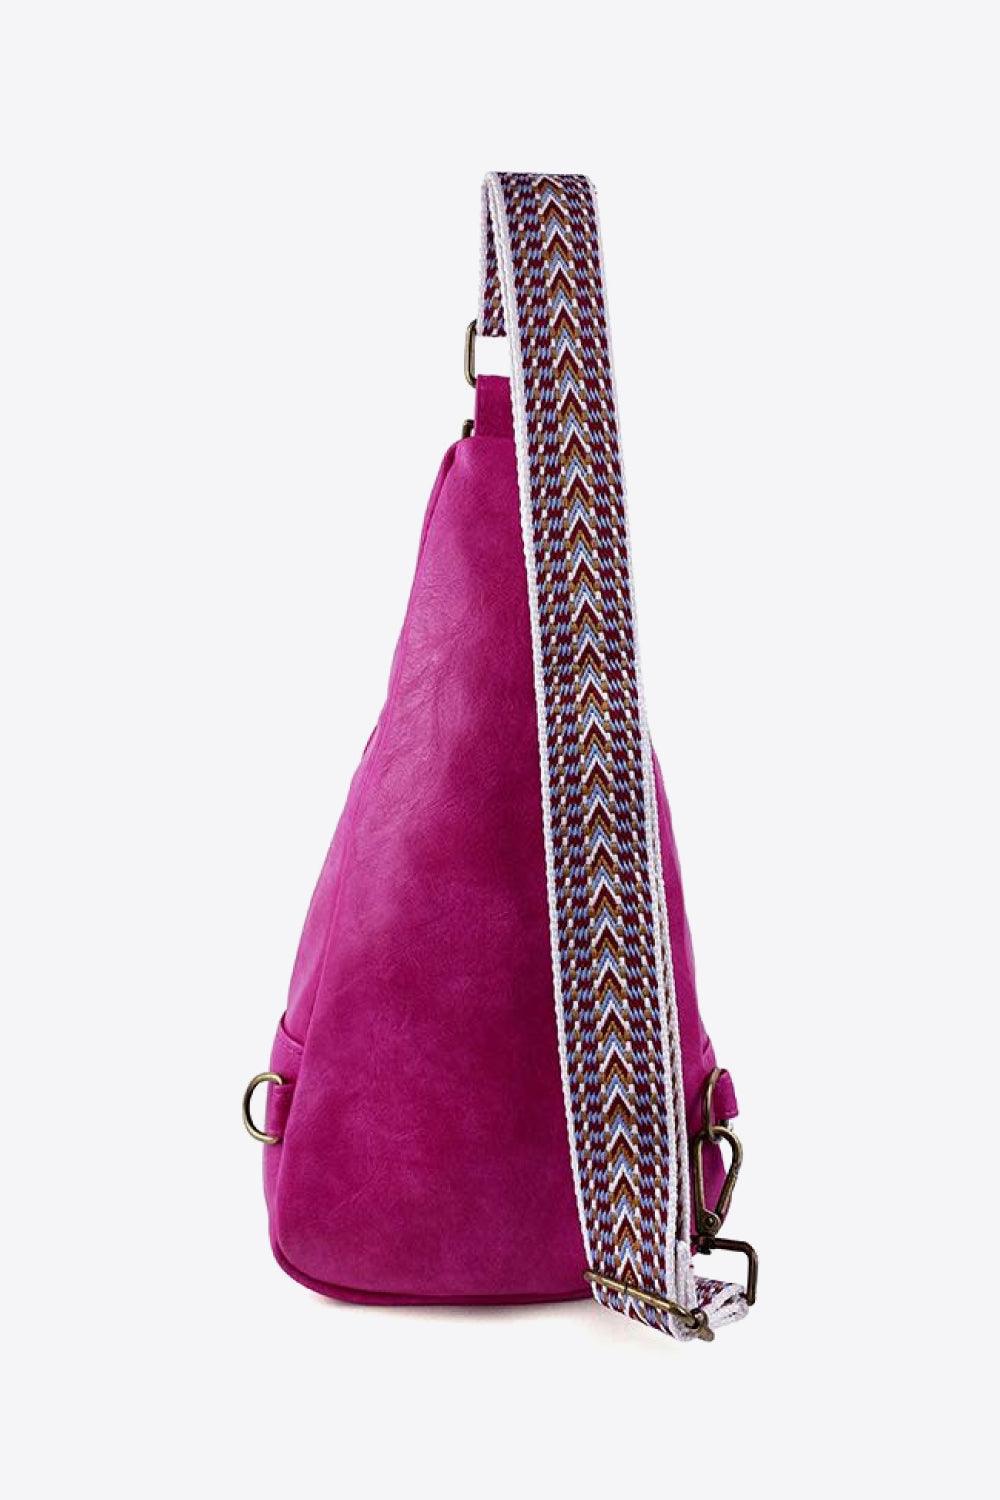 PU Leather Sling Bag - Stylish & Compact Design - Shop Now!